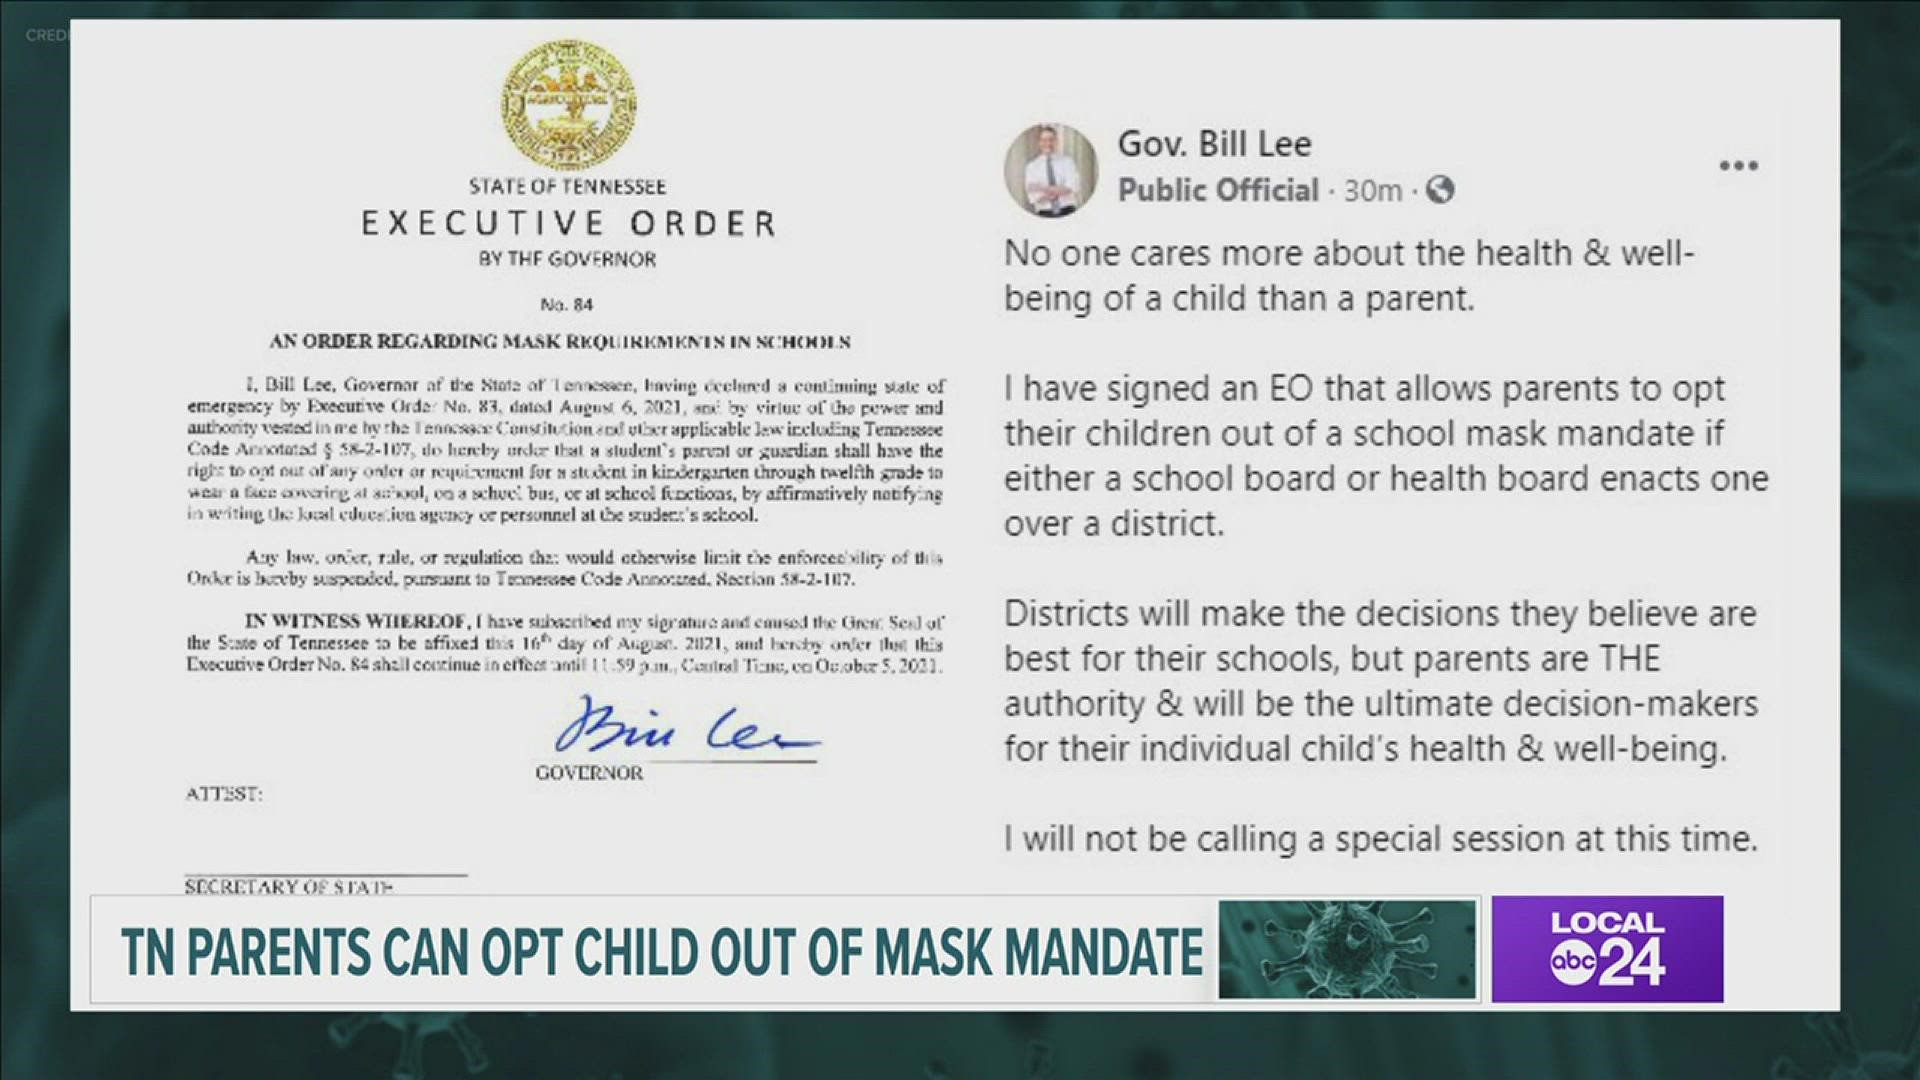 With executive order, Gov. Lee said, “...parents will have the ultimate decision-making for their individual child’s health and well-being.”